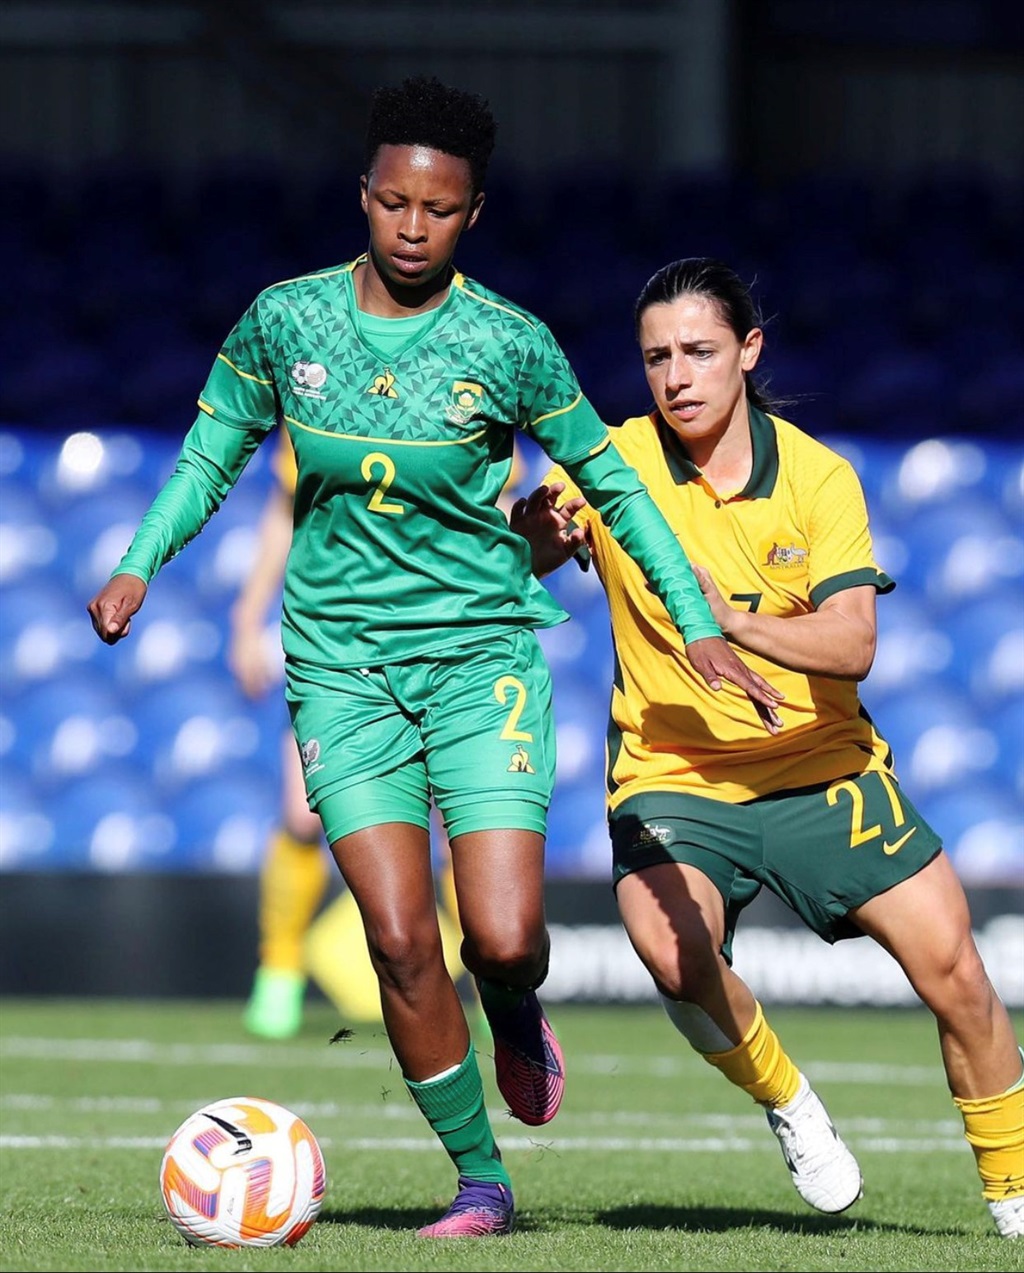 Thato Letsoso in action for Banyana against Austra